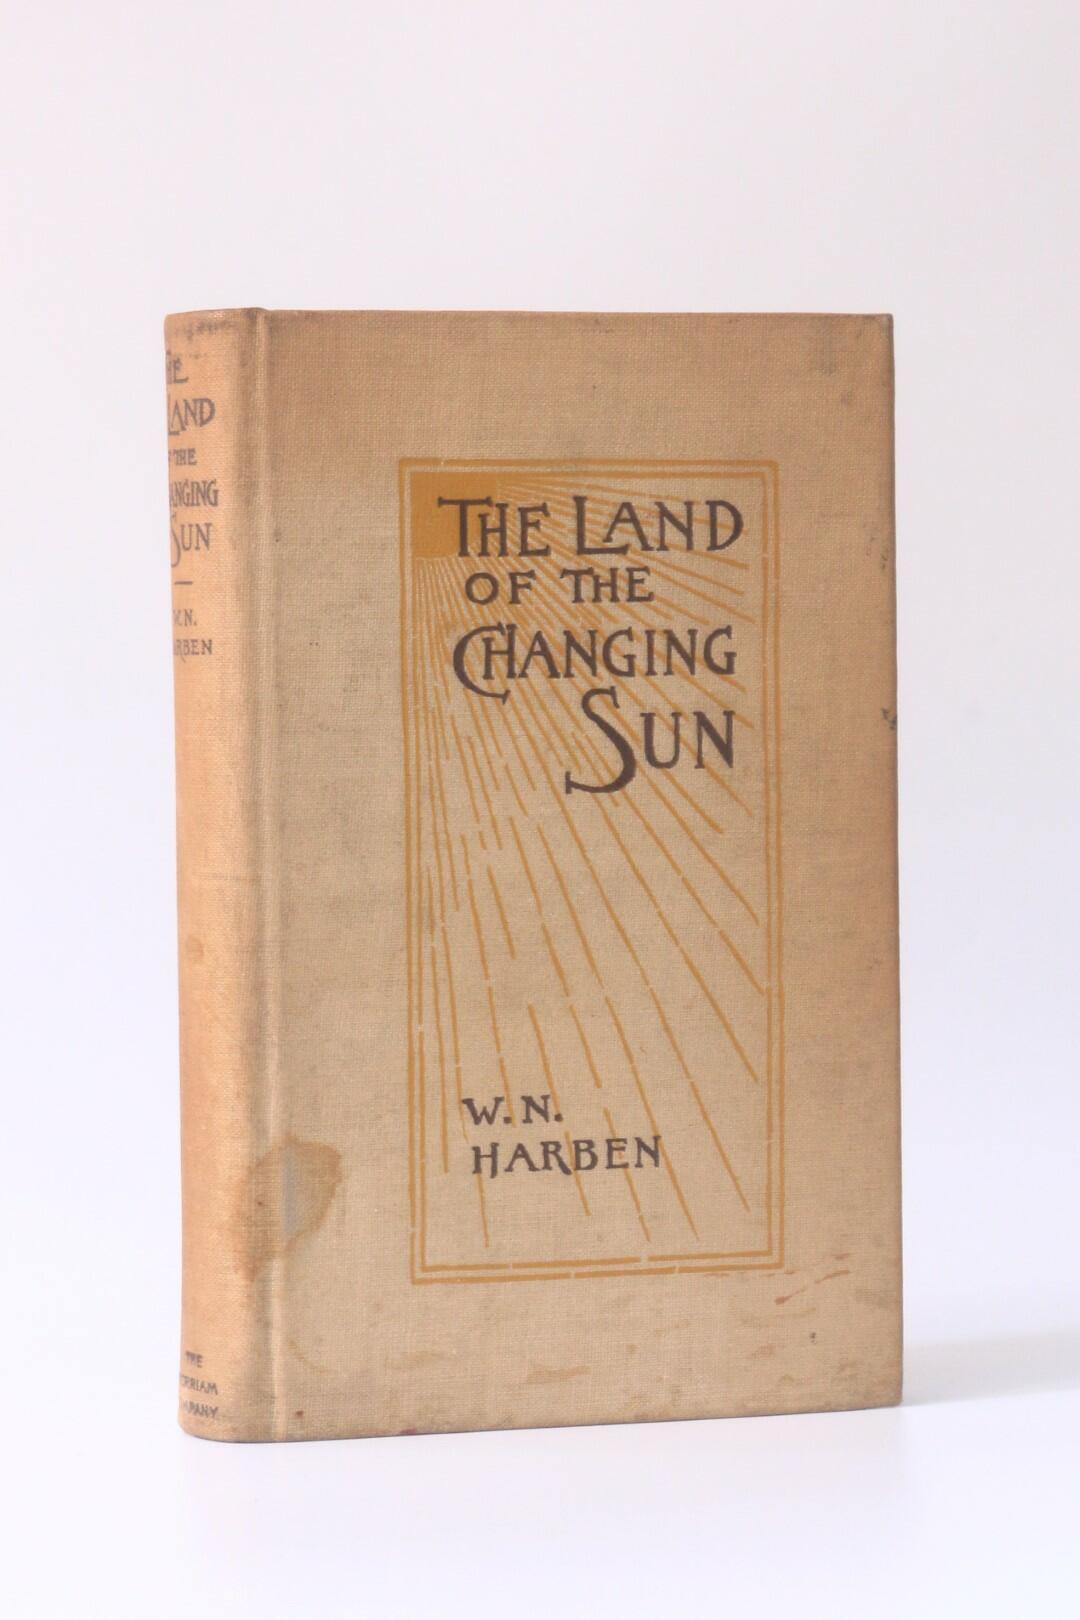 W.N. Harben - The Land of the Changing Sun - The Merriam Company, 1894, First Edition.